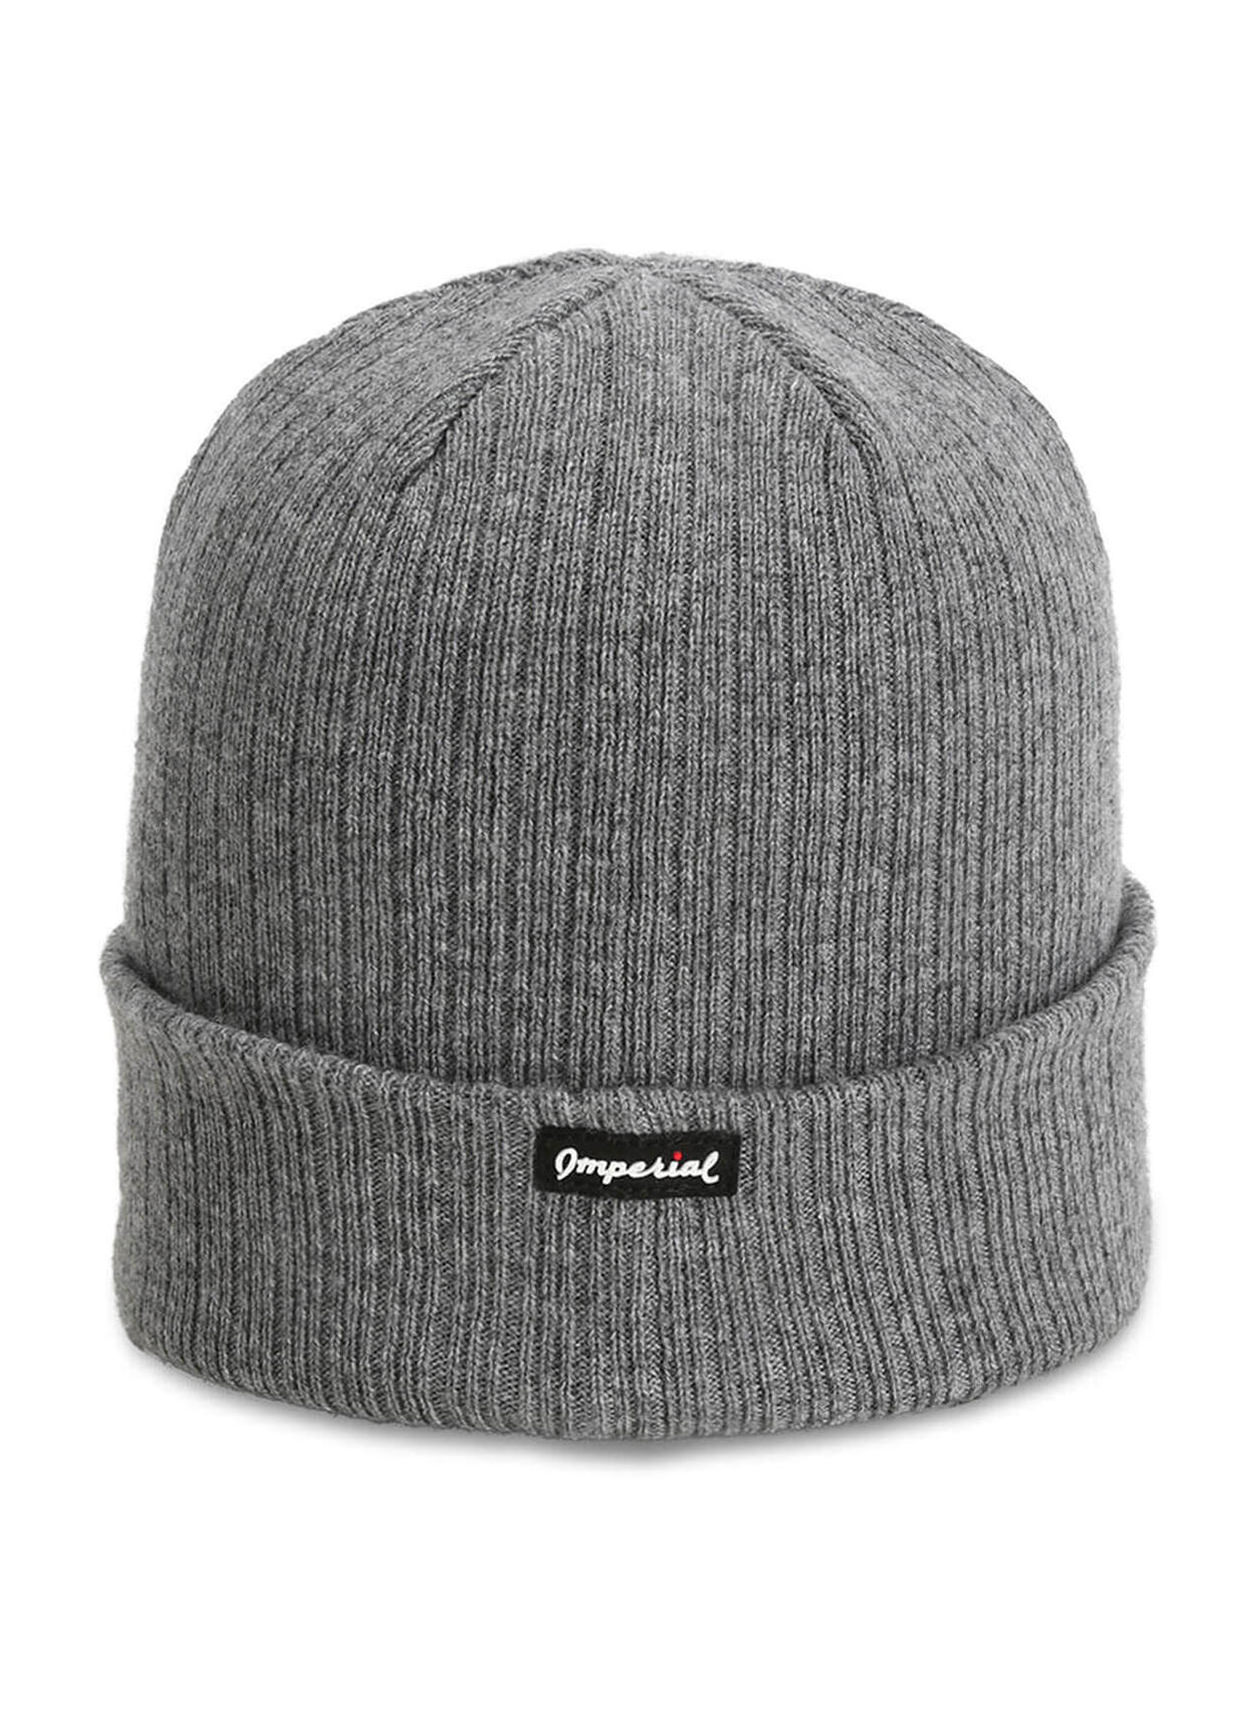 Imperial Graphite The Edelweiss Cashmere and Wool Knit Beanie